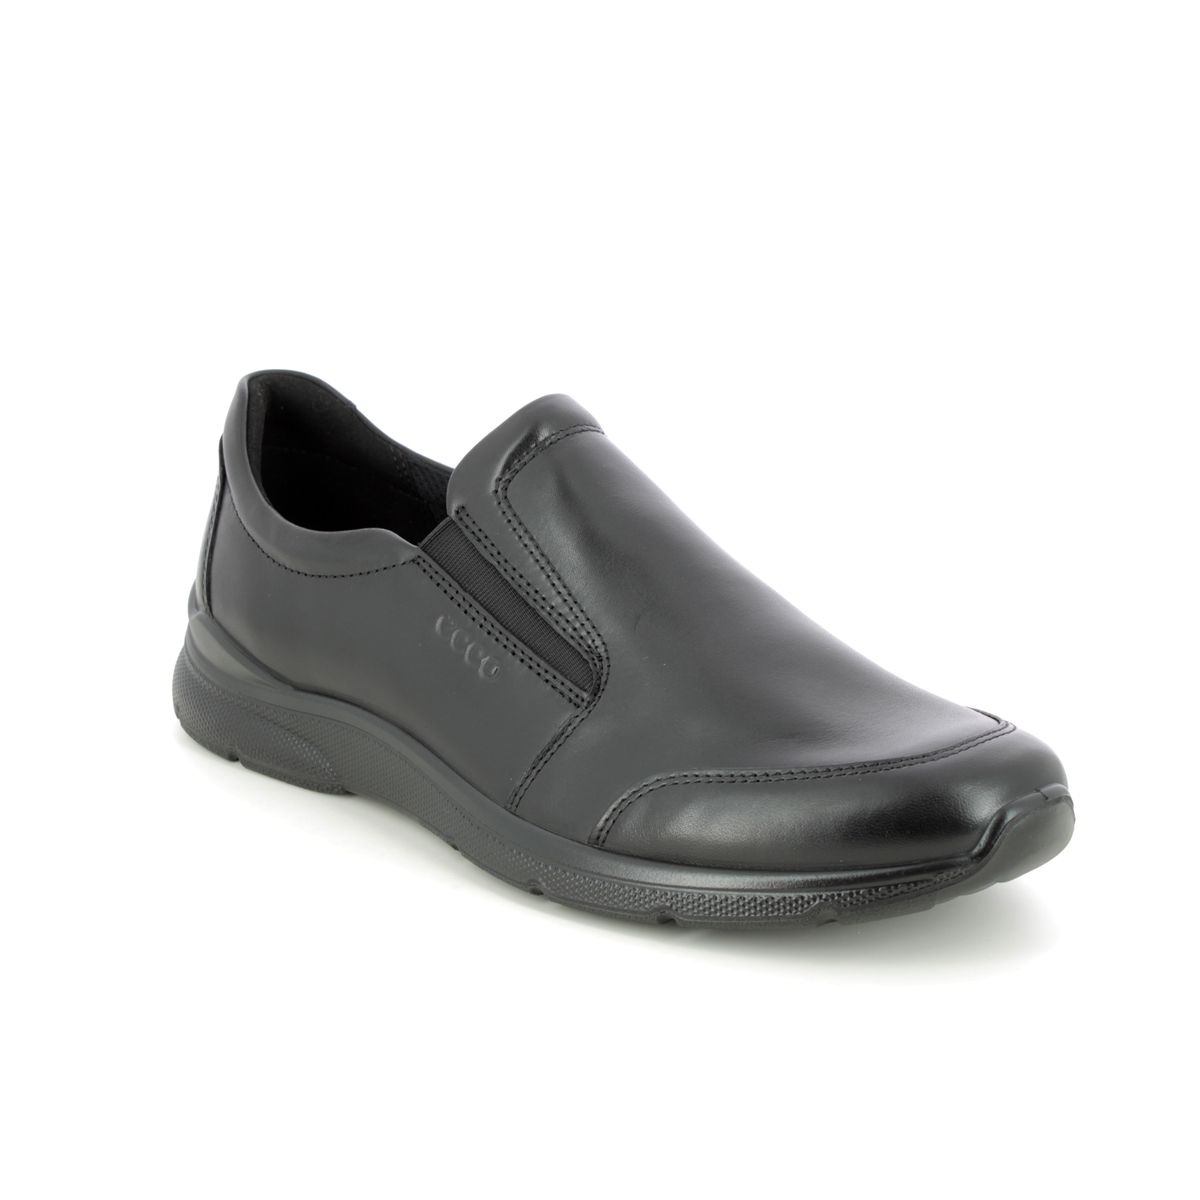 Ecco Irving Slip-On Black Leather Mens Slip-On Shoes 511684-11001 In Size 41 In Plain Black Leather